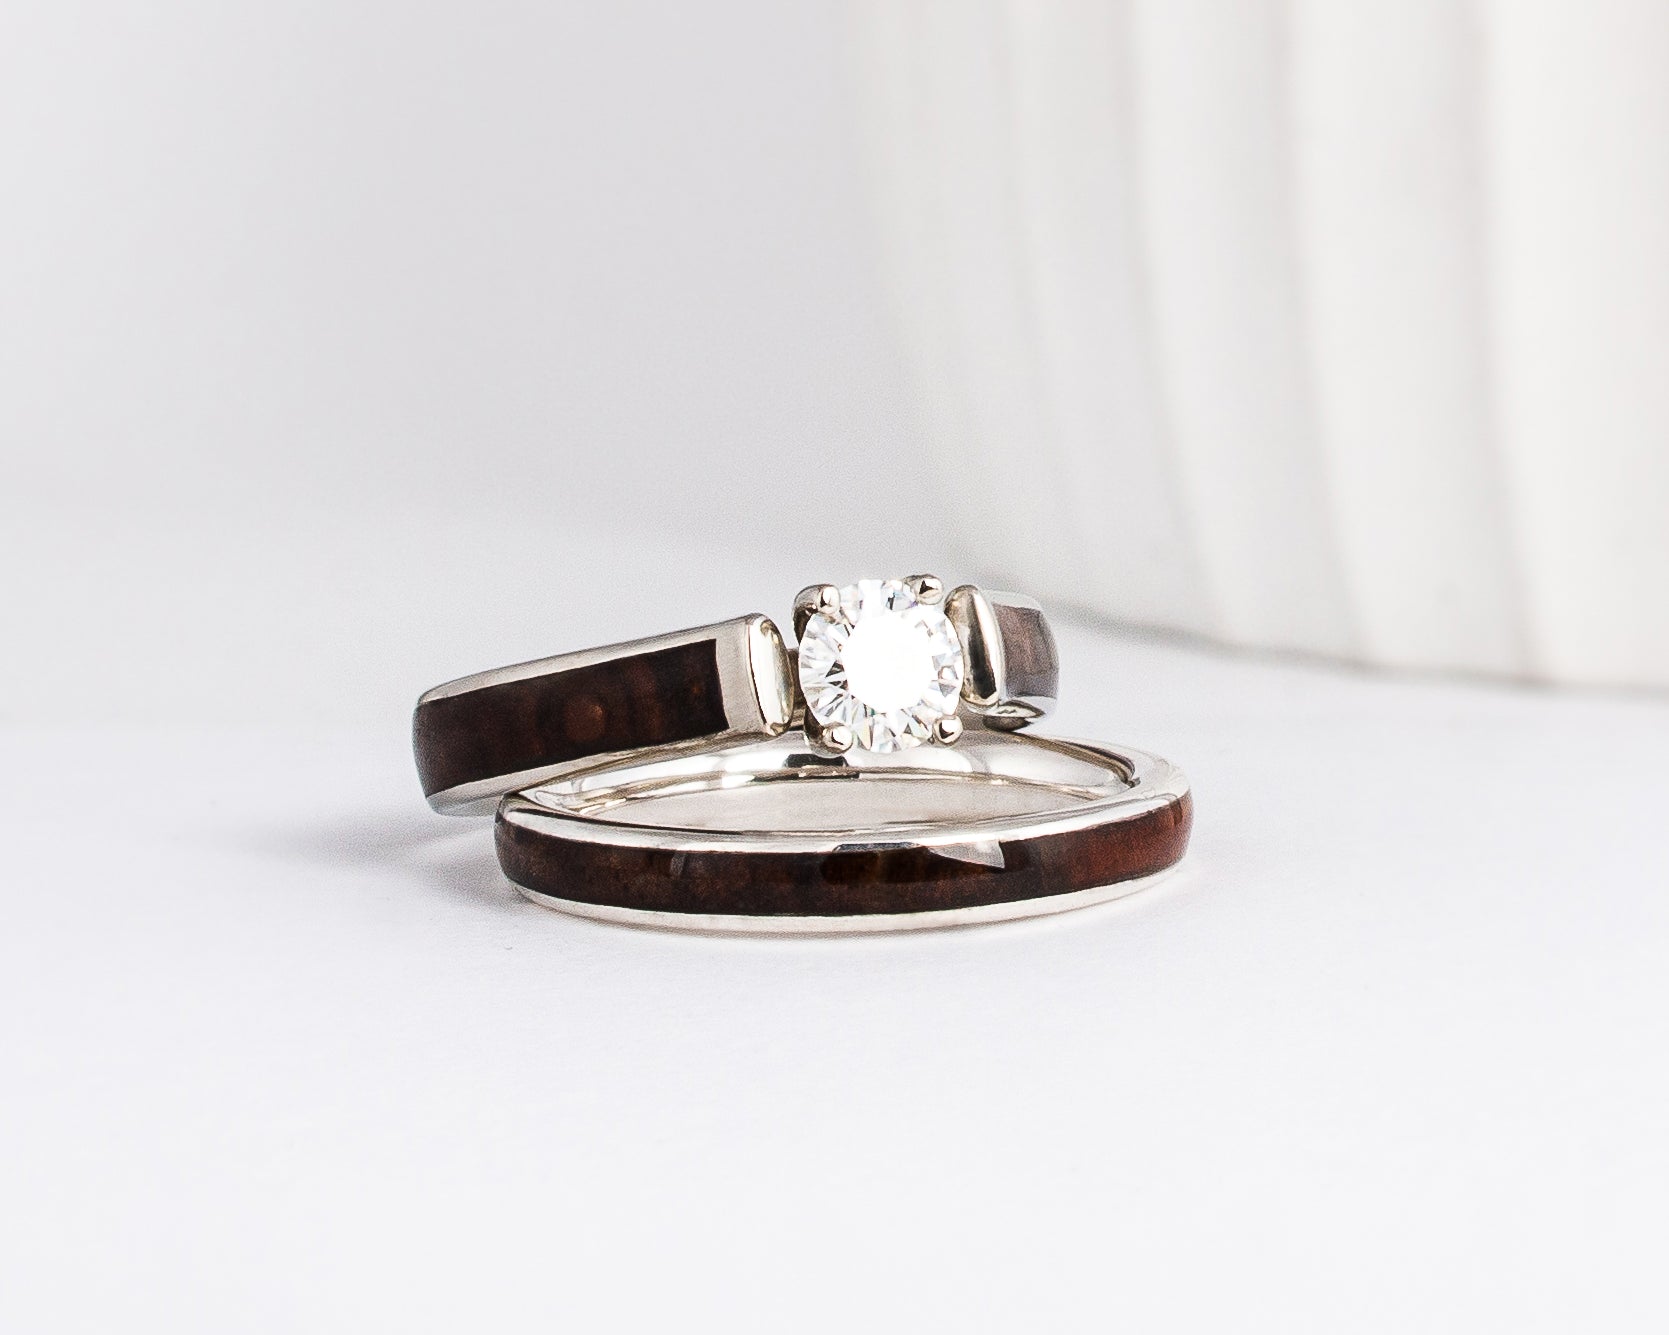 a set of white gold and wood inlay rings is shown with walnut burl wood inlays